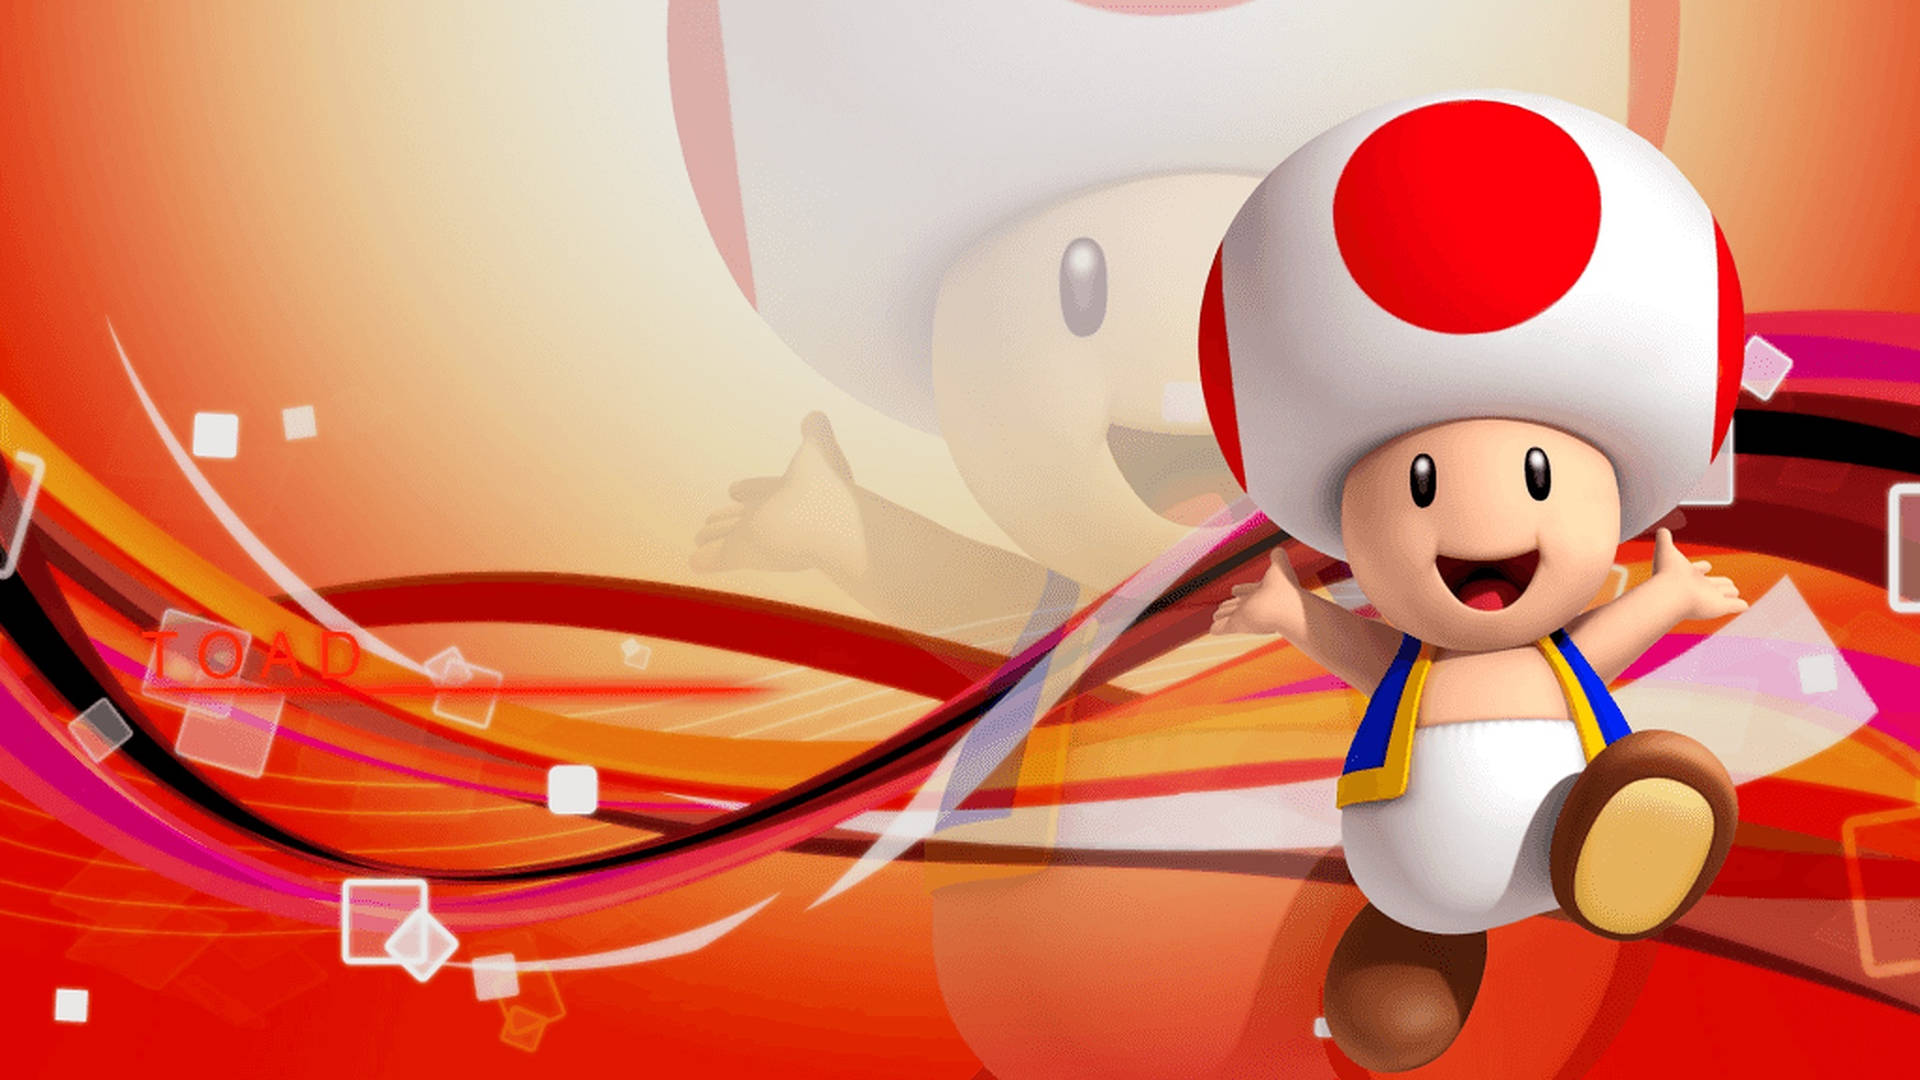 Nintendo Character Toad Poster Background